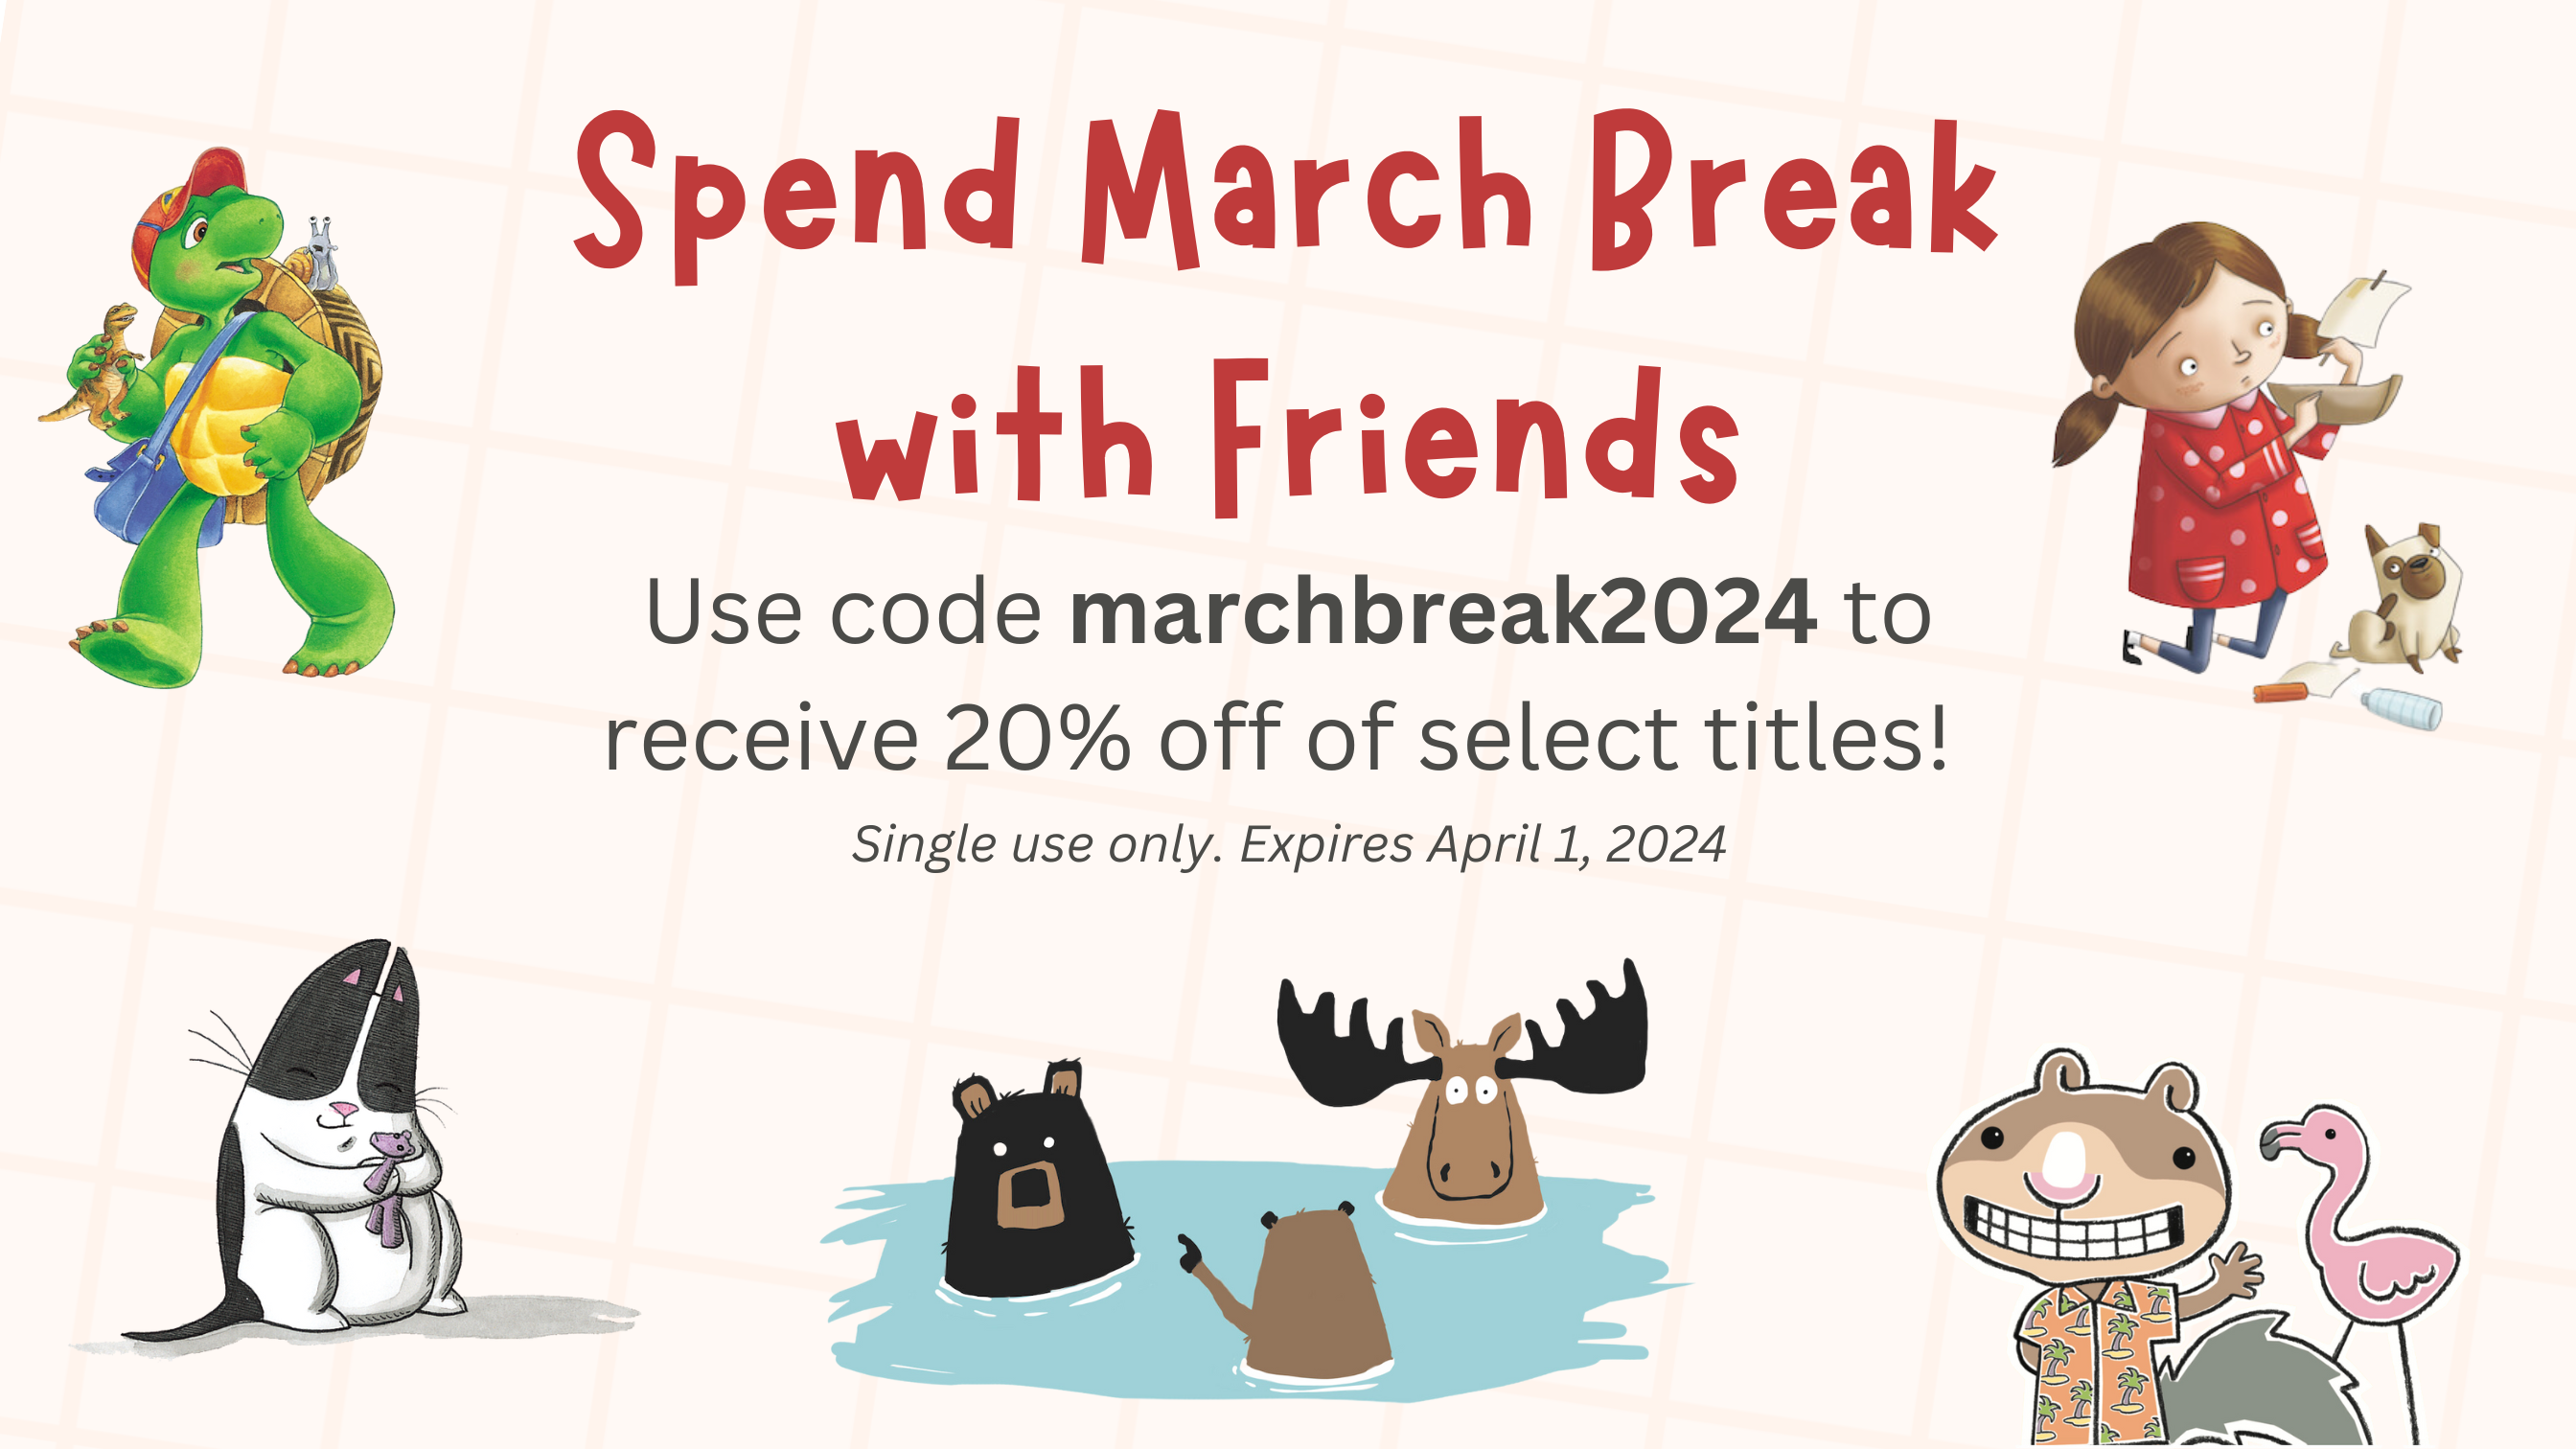 Spend March Break with Friends. Use code marchbreak2024 to receive 20% off select titles! Single use only. Expires April 1, 2024.